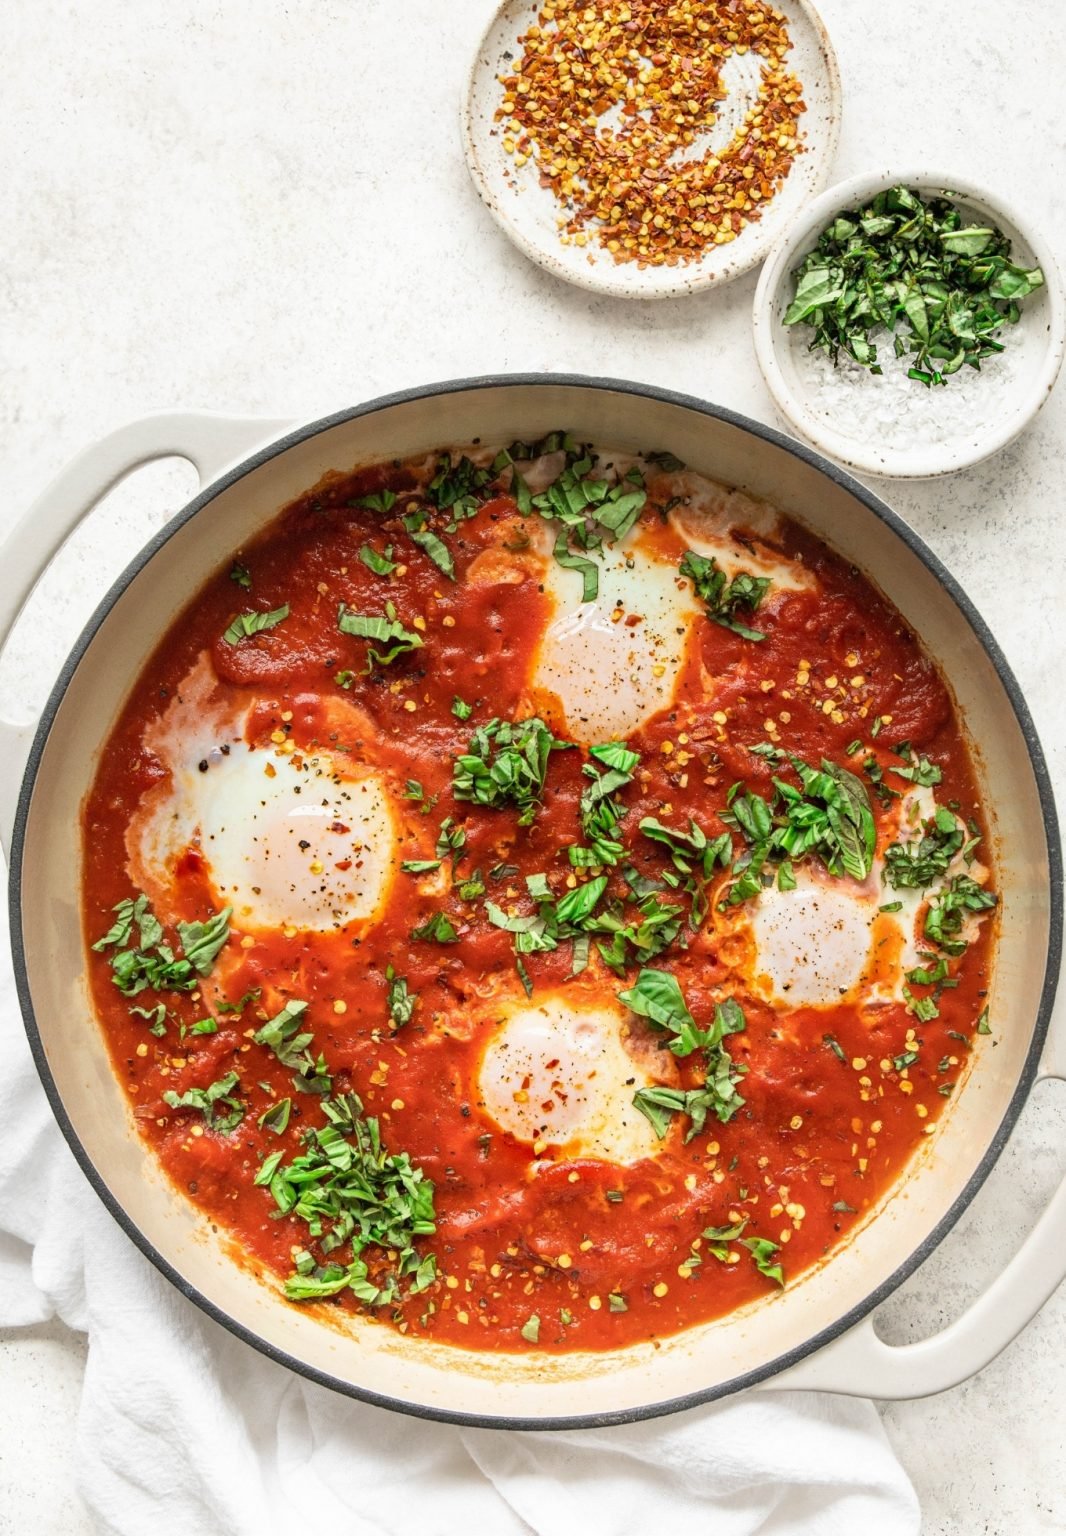 Shakshuka (Eggs Poached in Tomato Sauce) - The Whole Cook